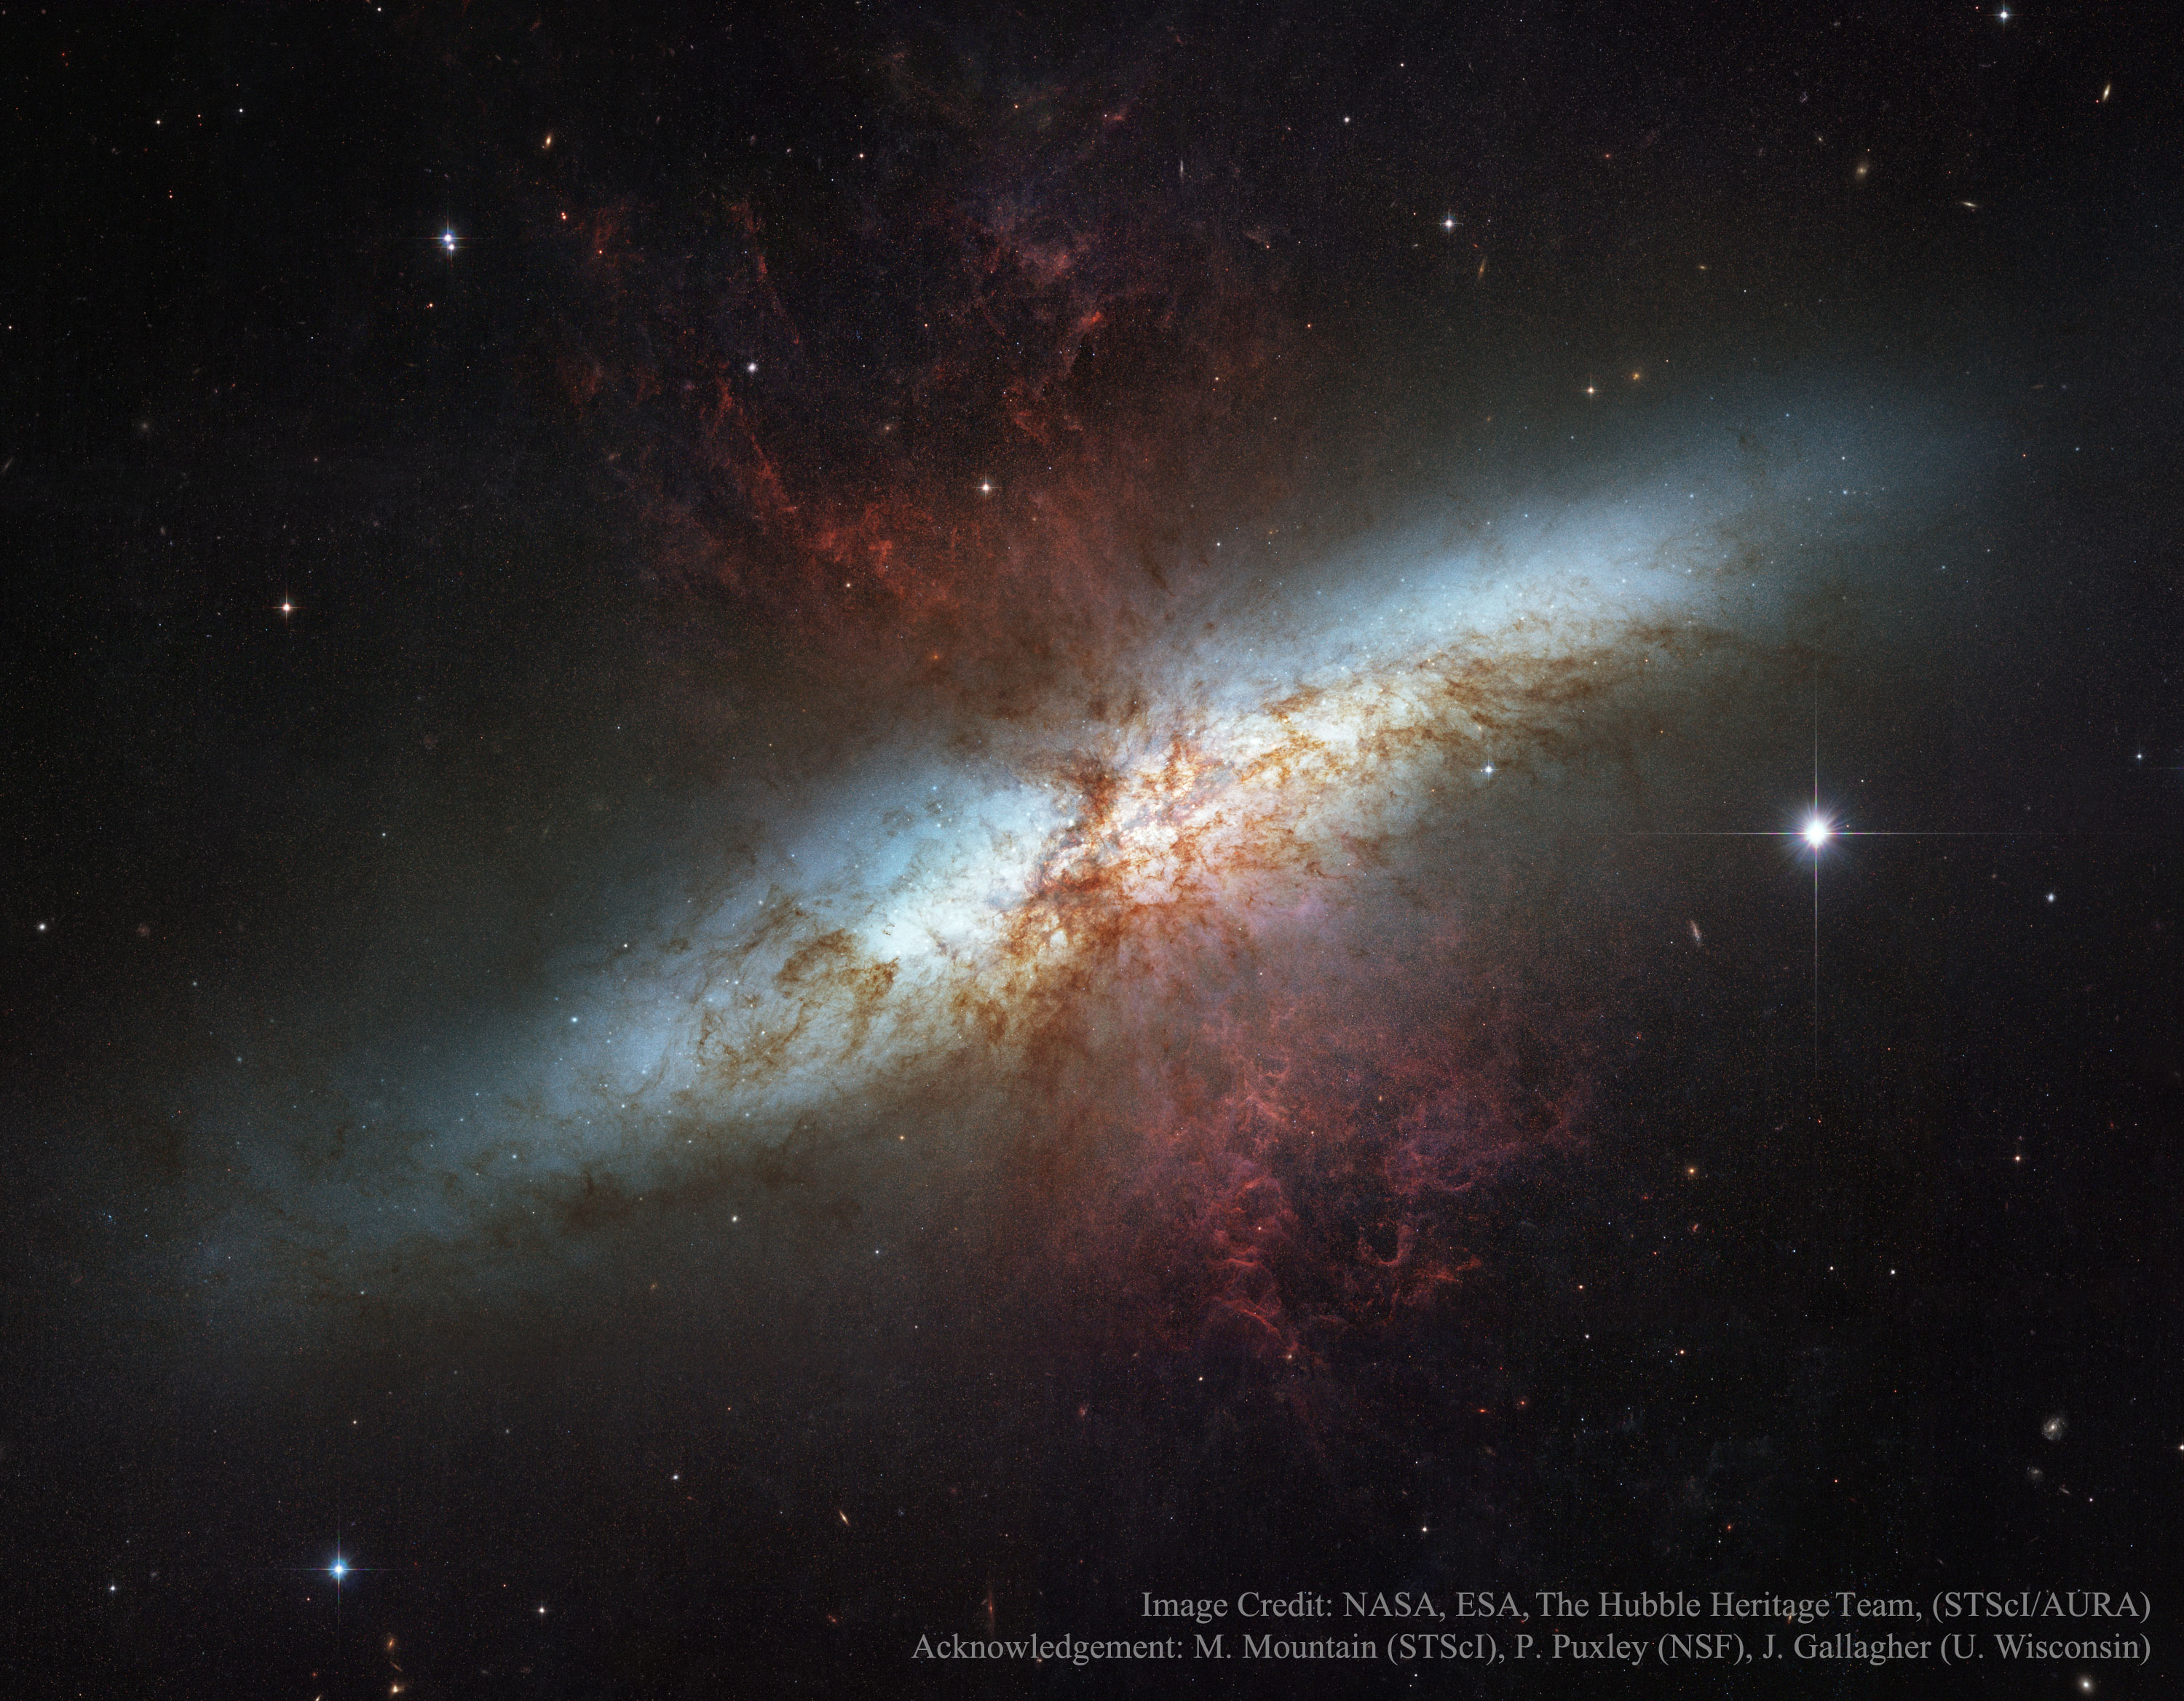 M82: Galaxy with a Supergalactic Wind